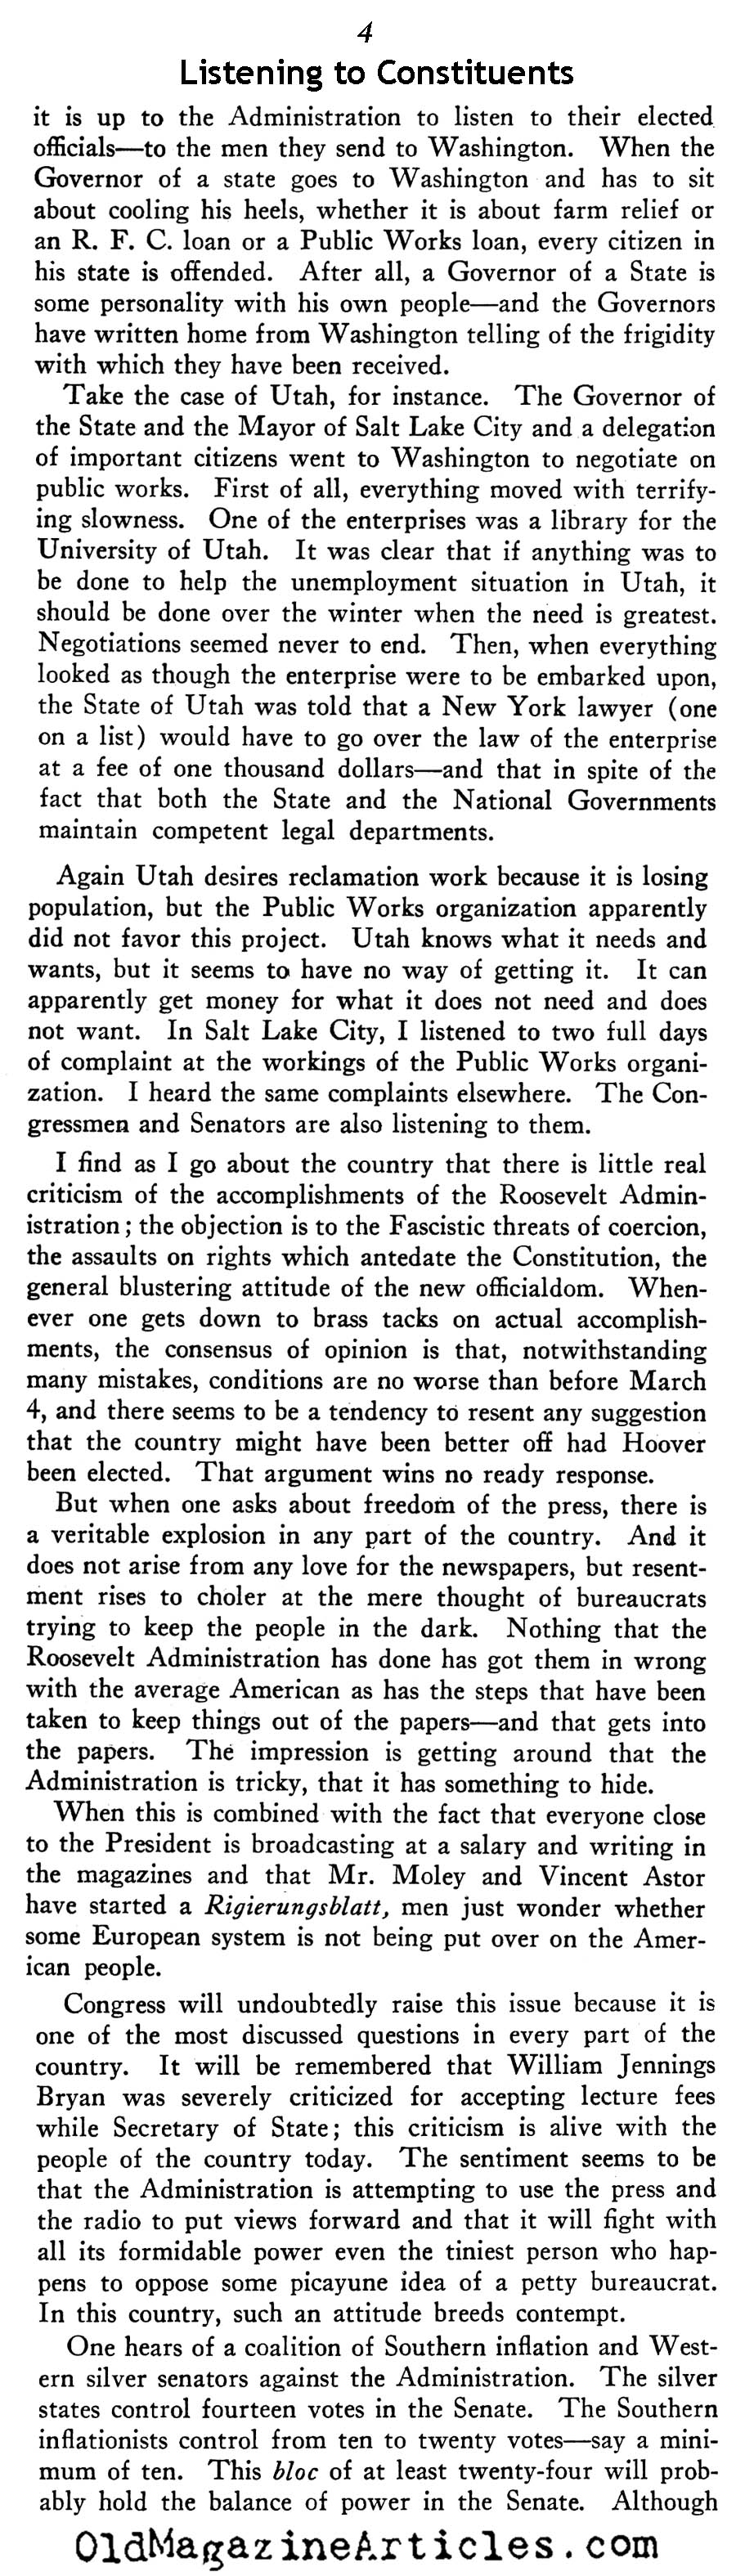 The Unhappy Constituents (New Outlook Magazine, 1933)